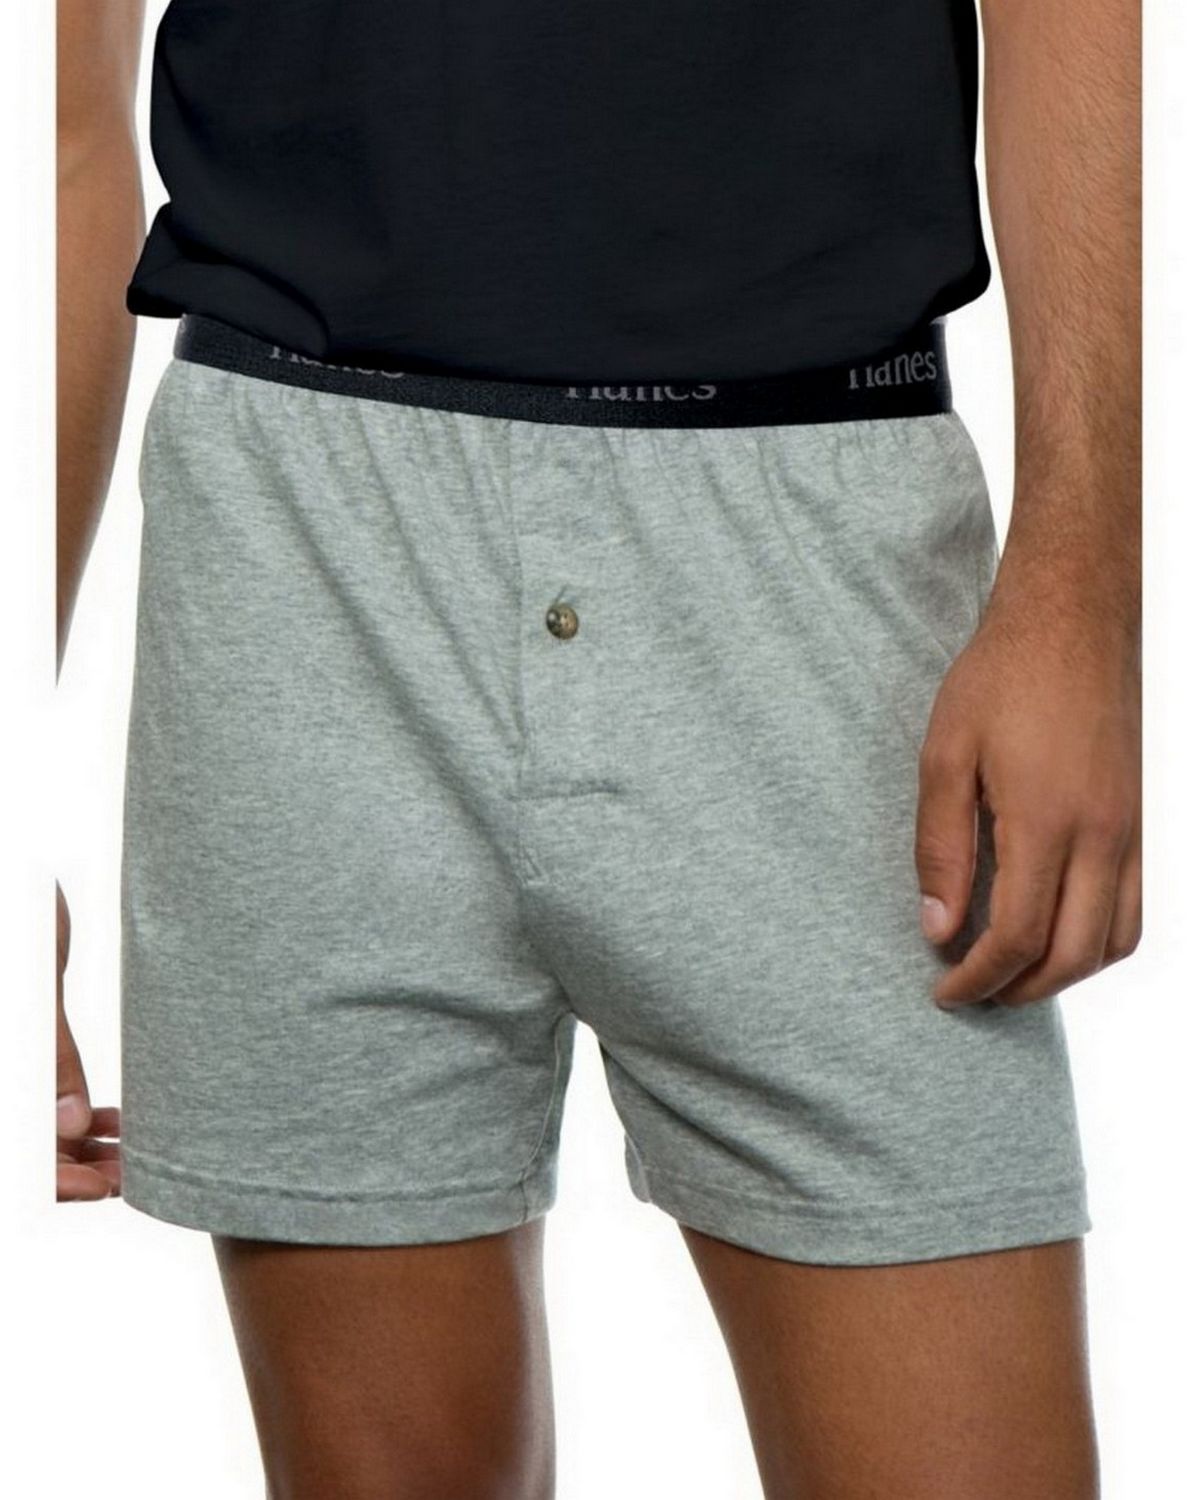 Hanes Classics Mens TAGLESS ComfortSoft Knit Boxers with Comfort